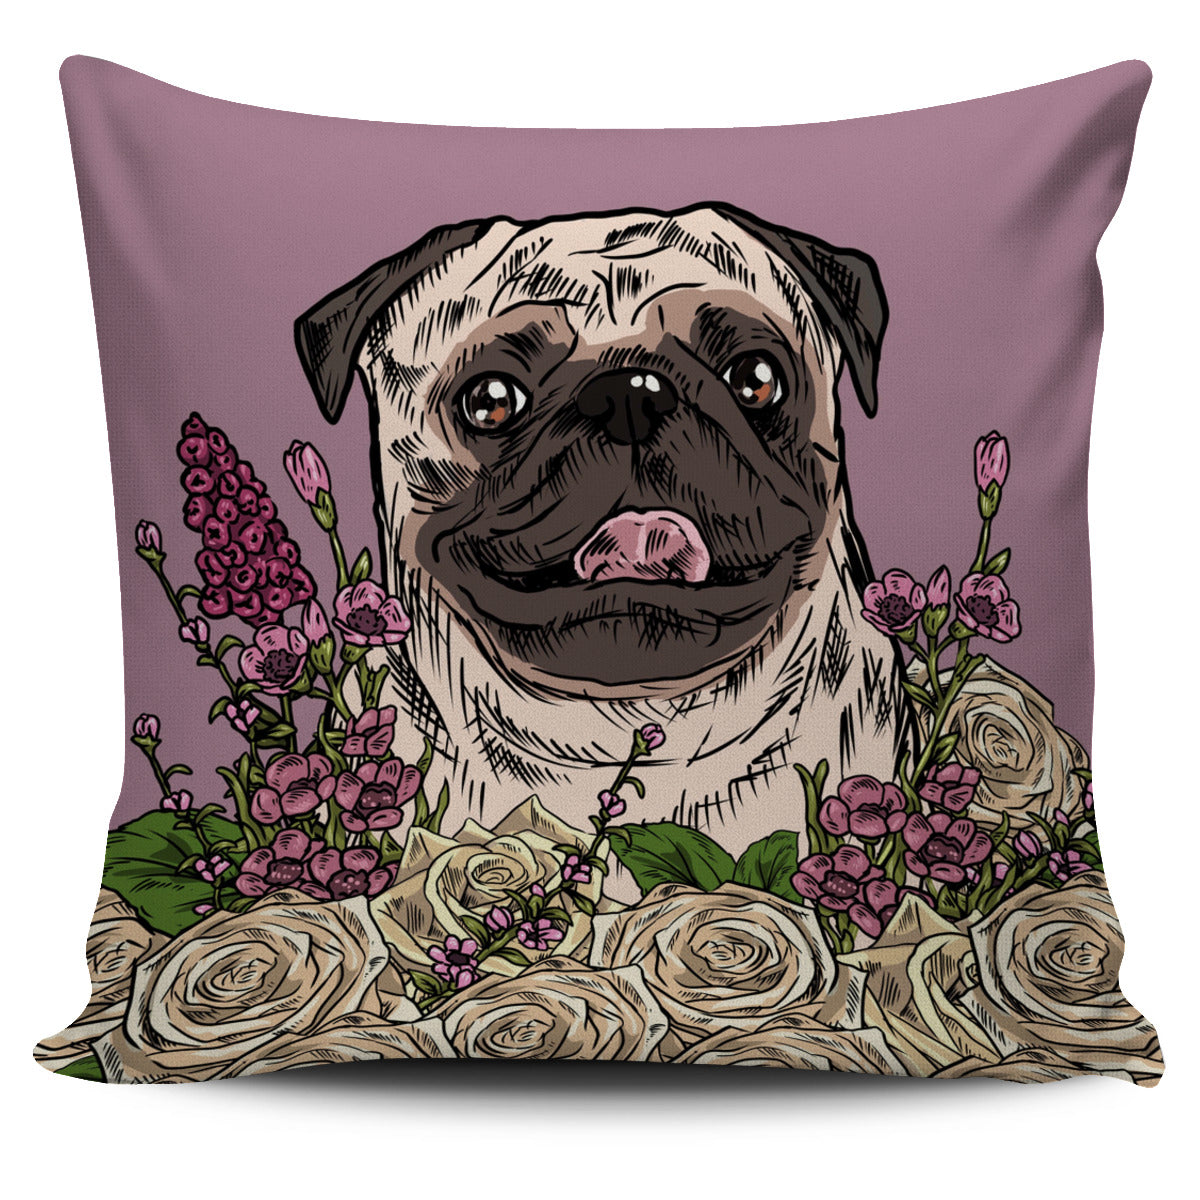 Illustrated Pug Pillow Cover